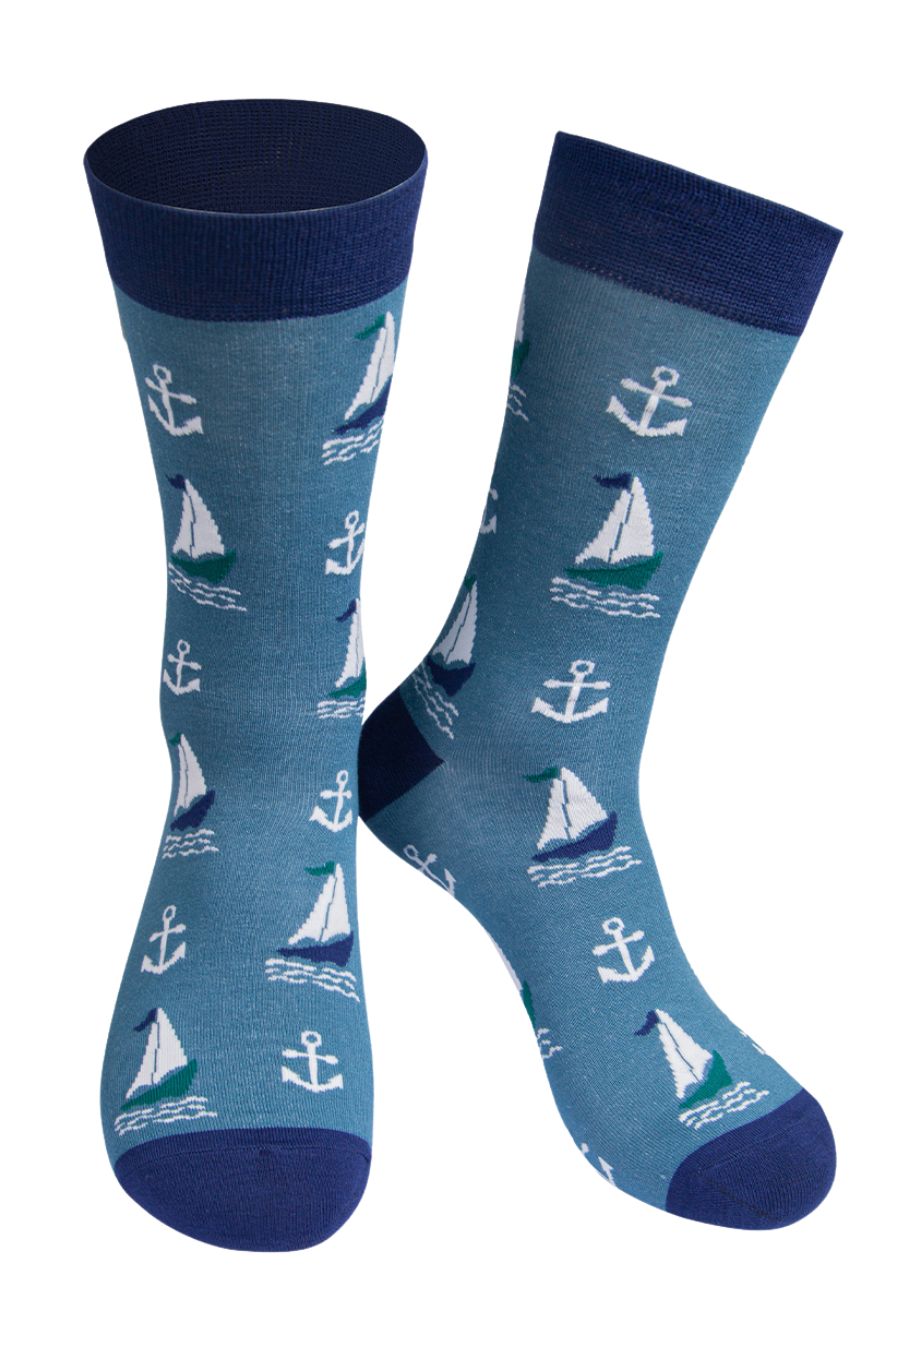 blue socks with a navy blue heel, toe and cuff with a pattern of sailing boats and anchors